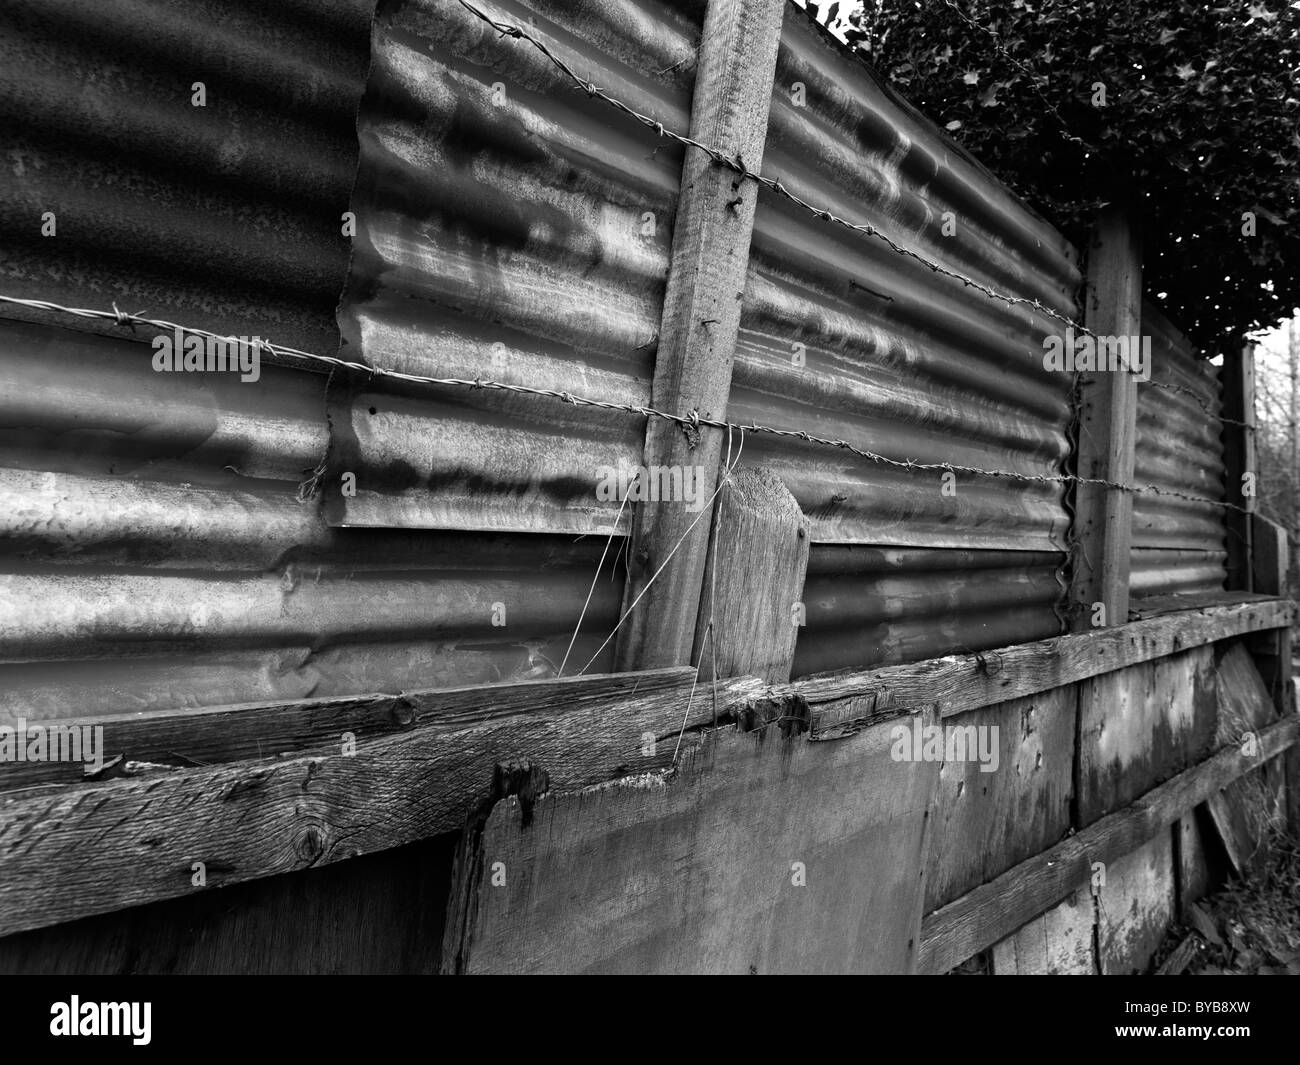 Corrugated sheeting used as a fence Stock Photo